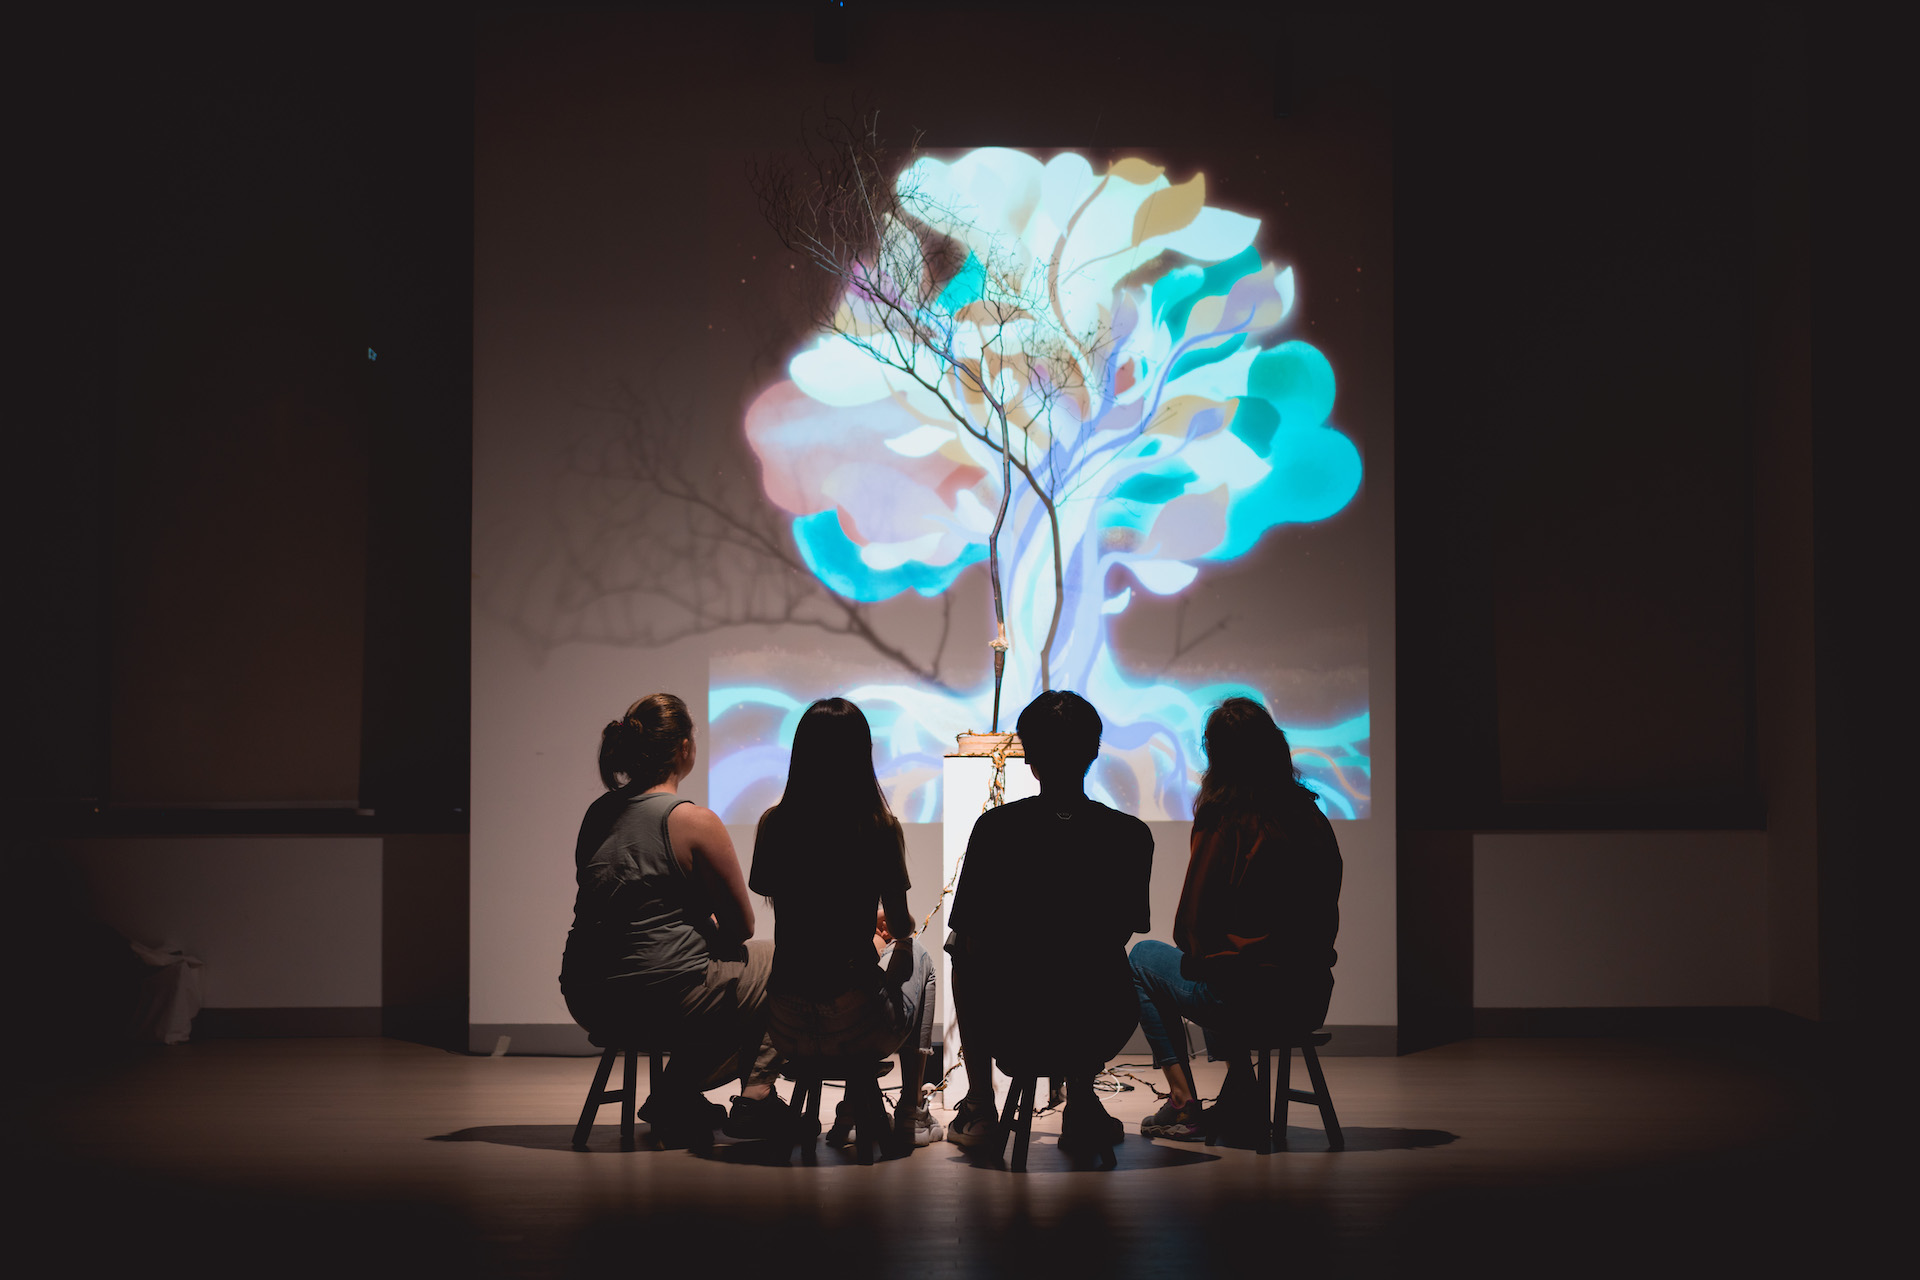 People looking at a projection of a colorful tree